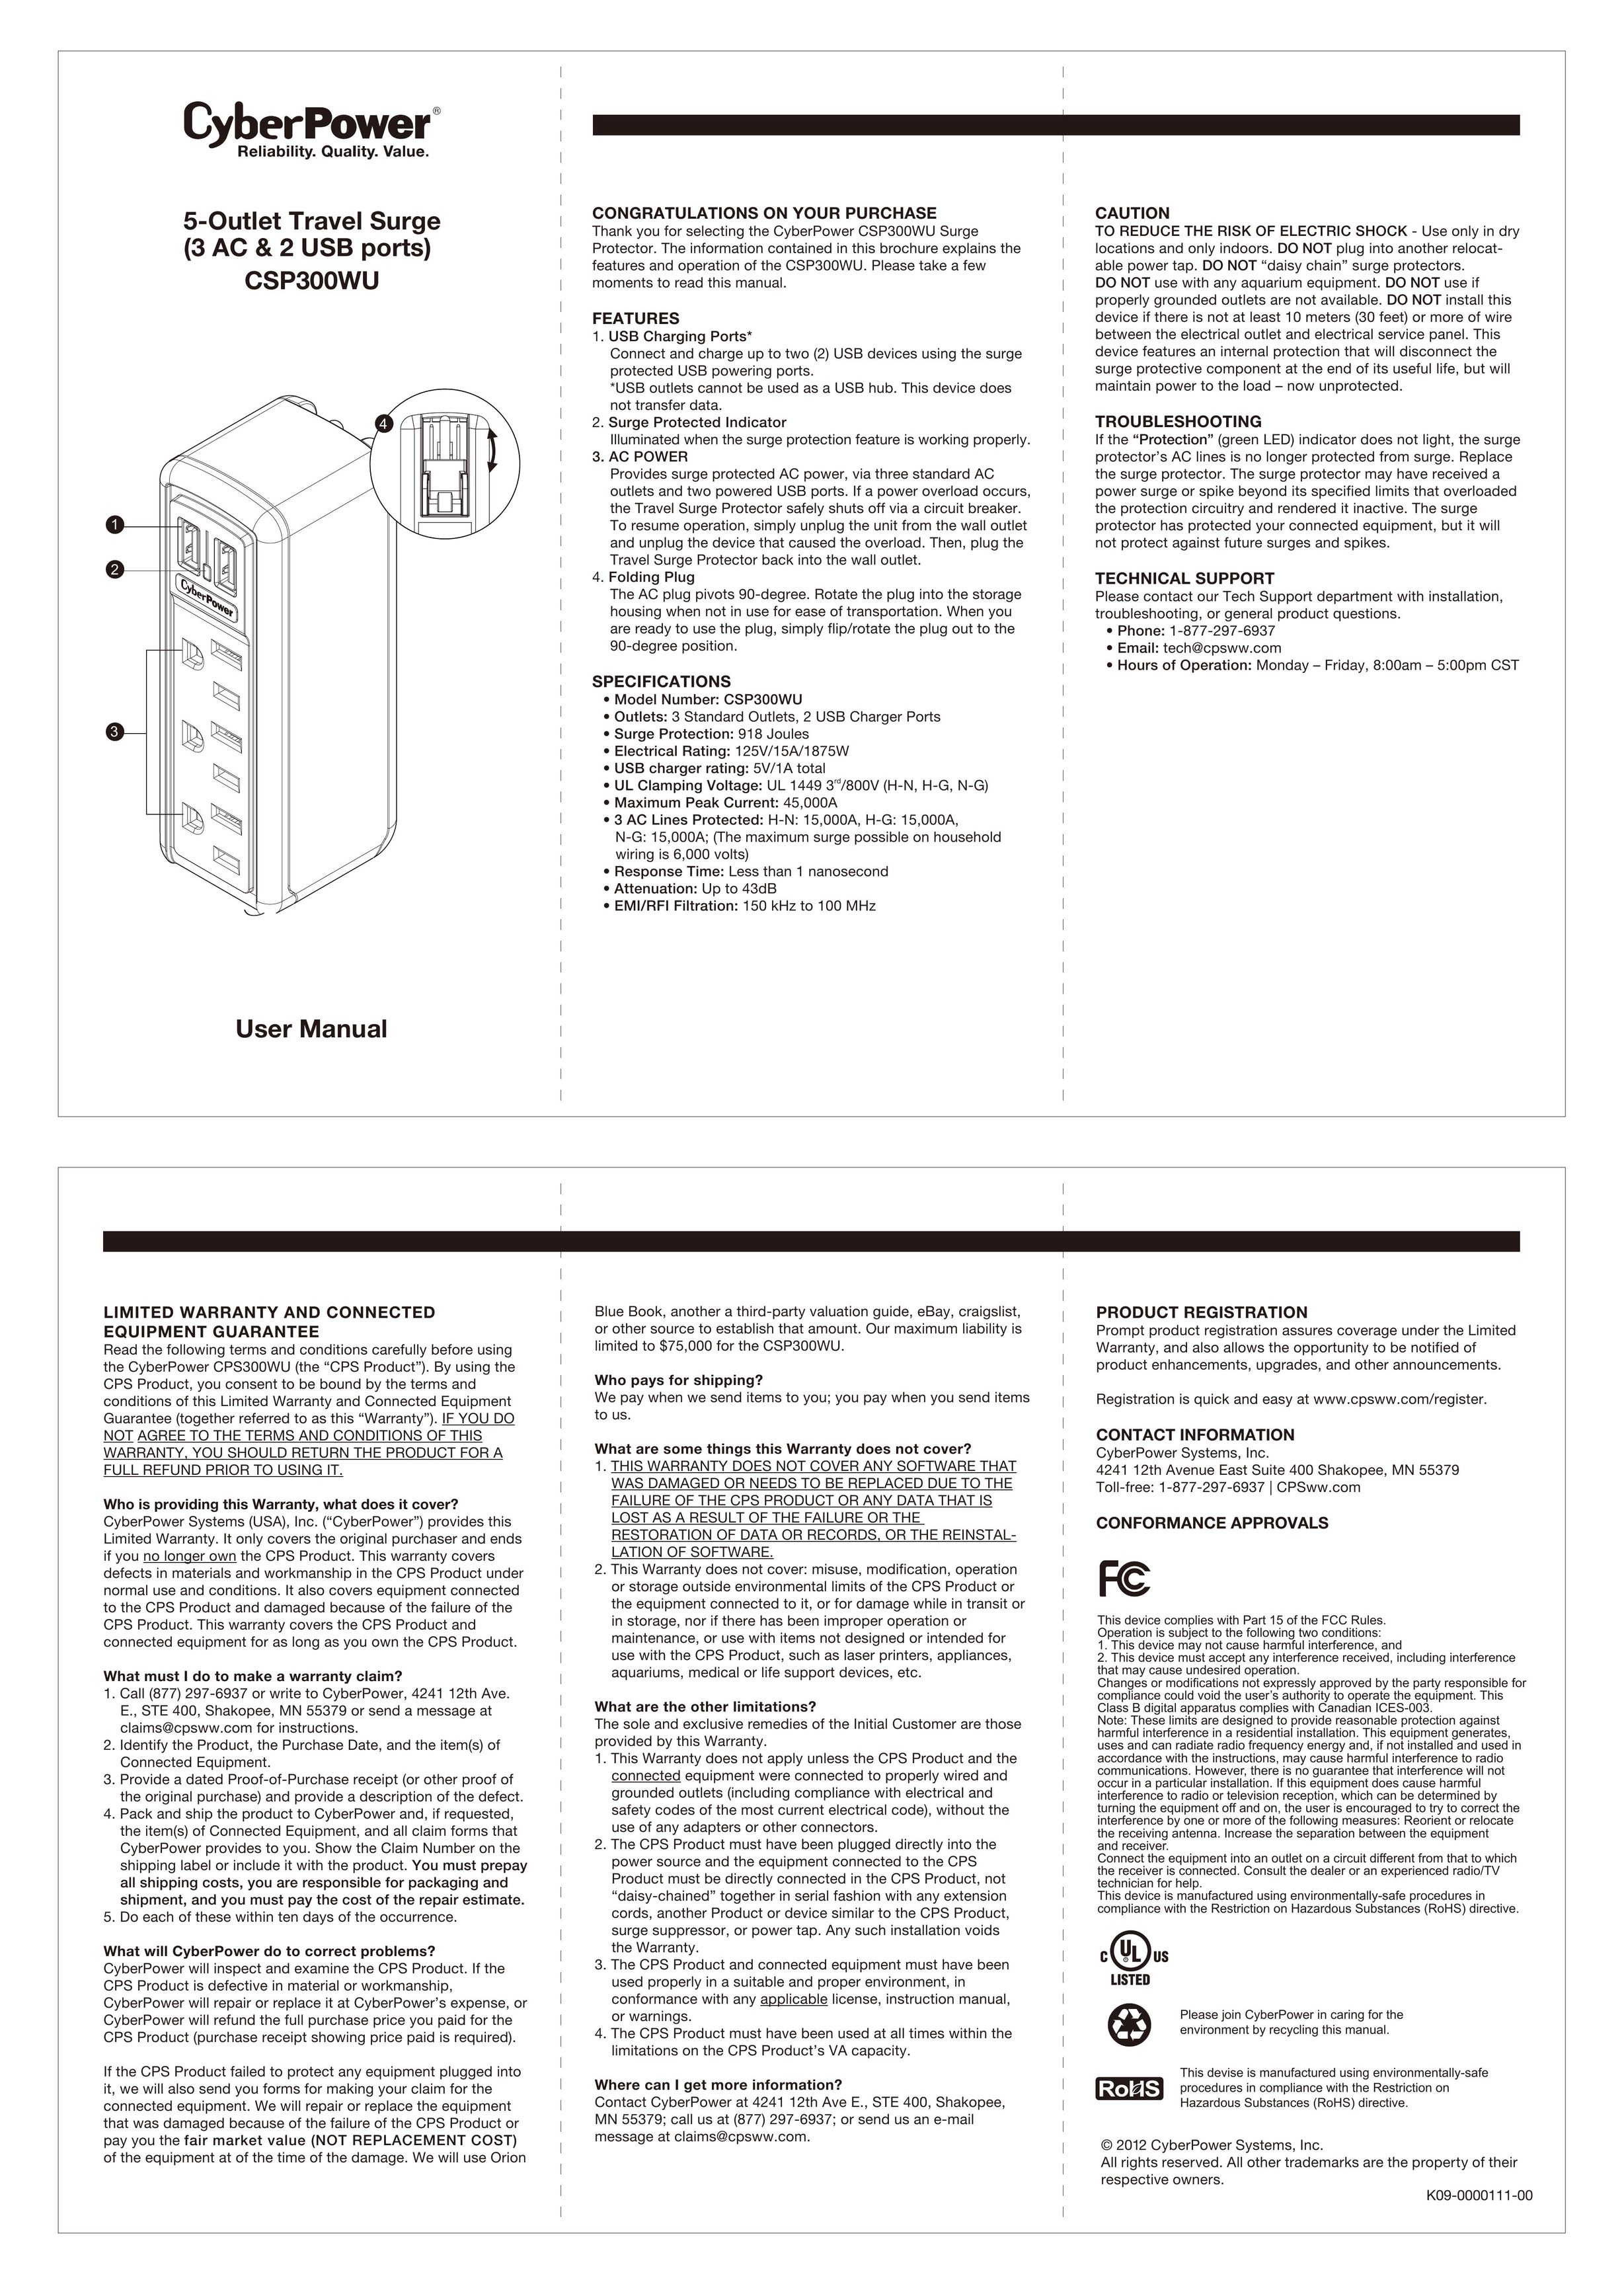 CyberPower CSP300WU Surge Protector User Manual